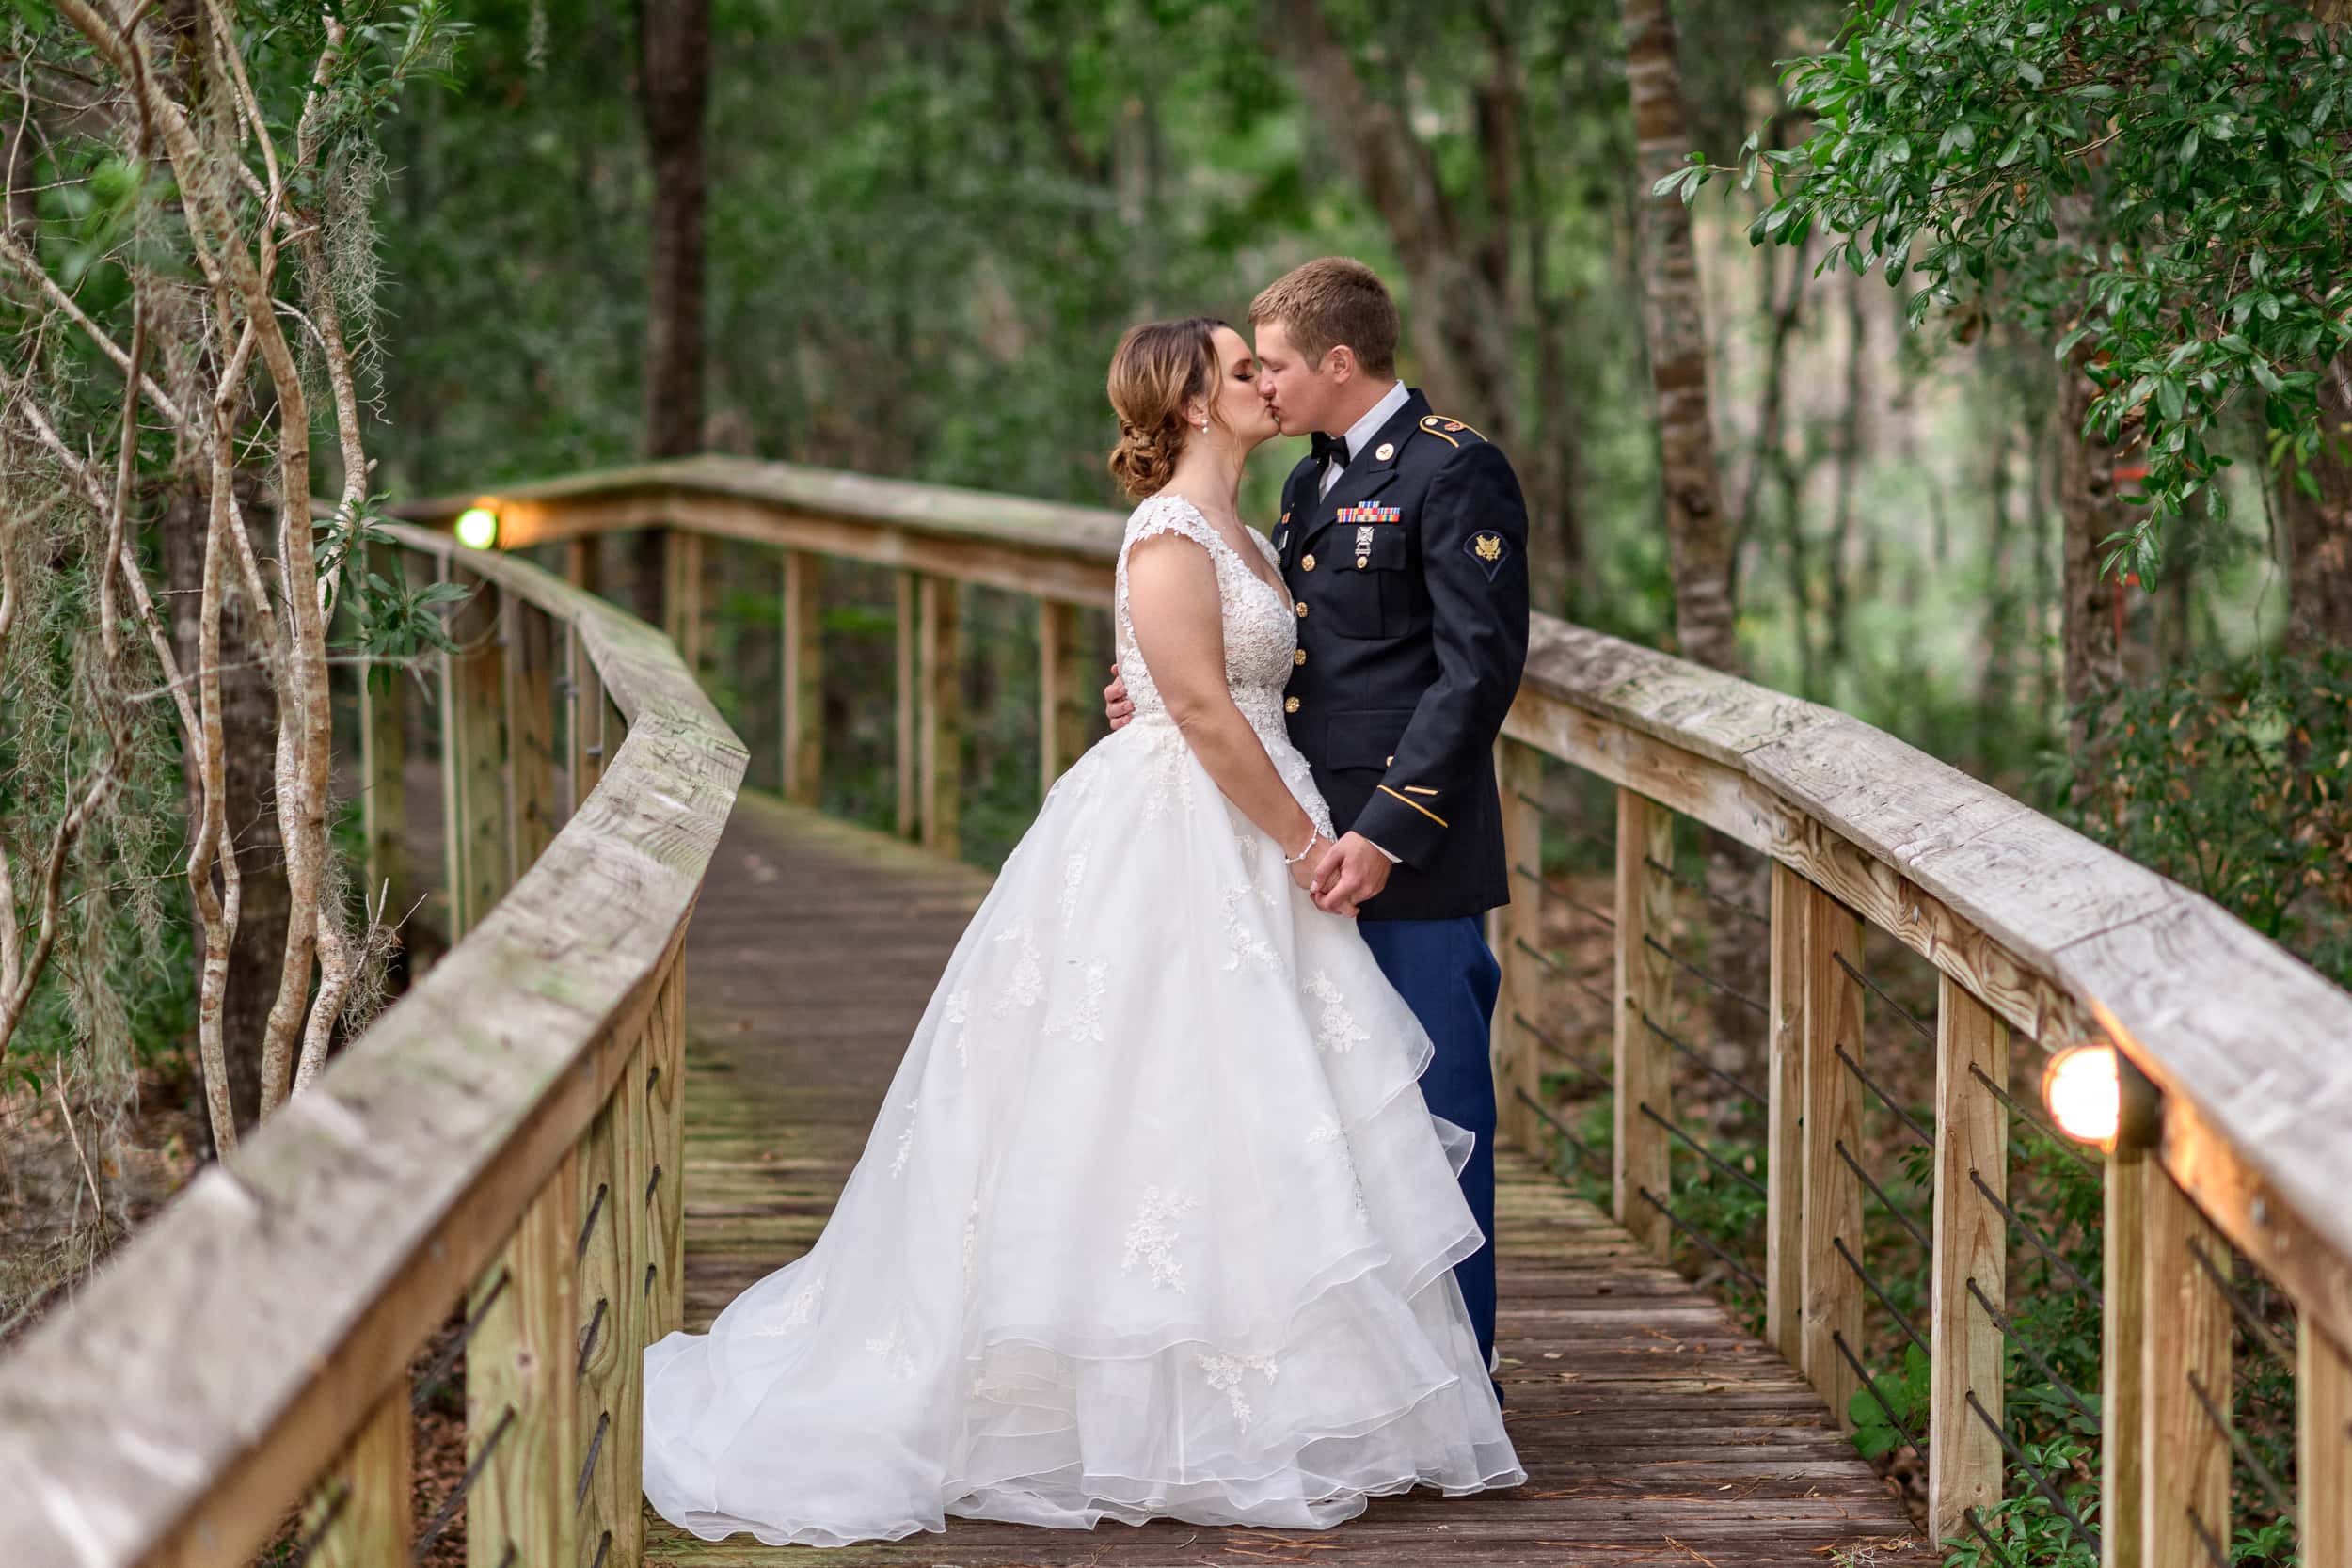 Kiss on a path through the forest - Reserve Harbor Yacht Club